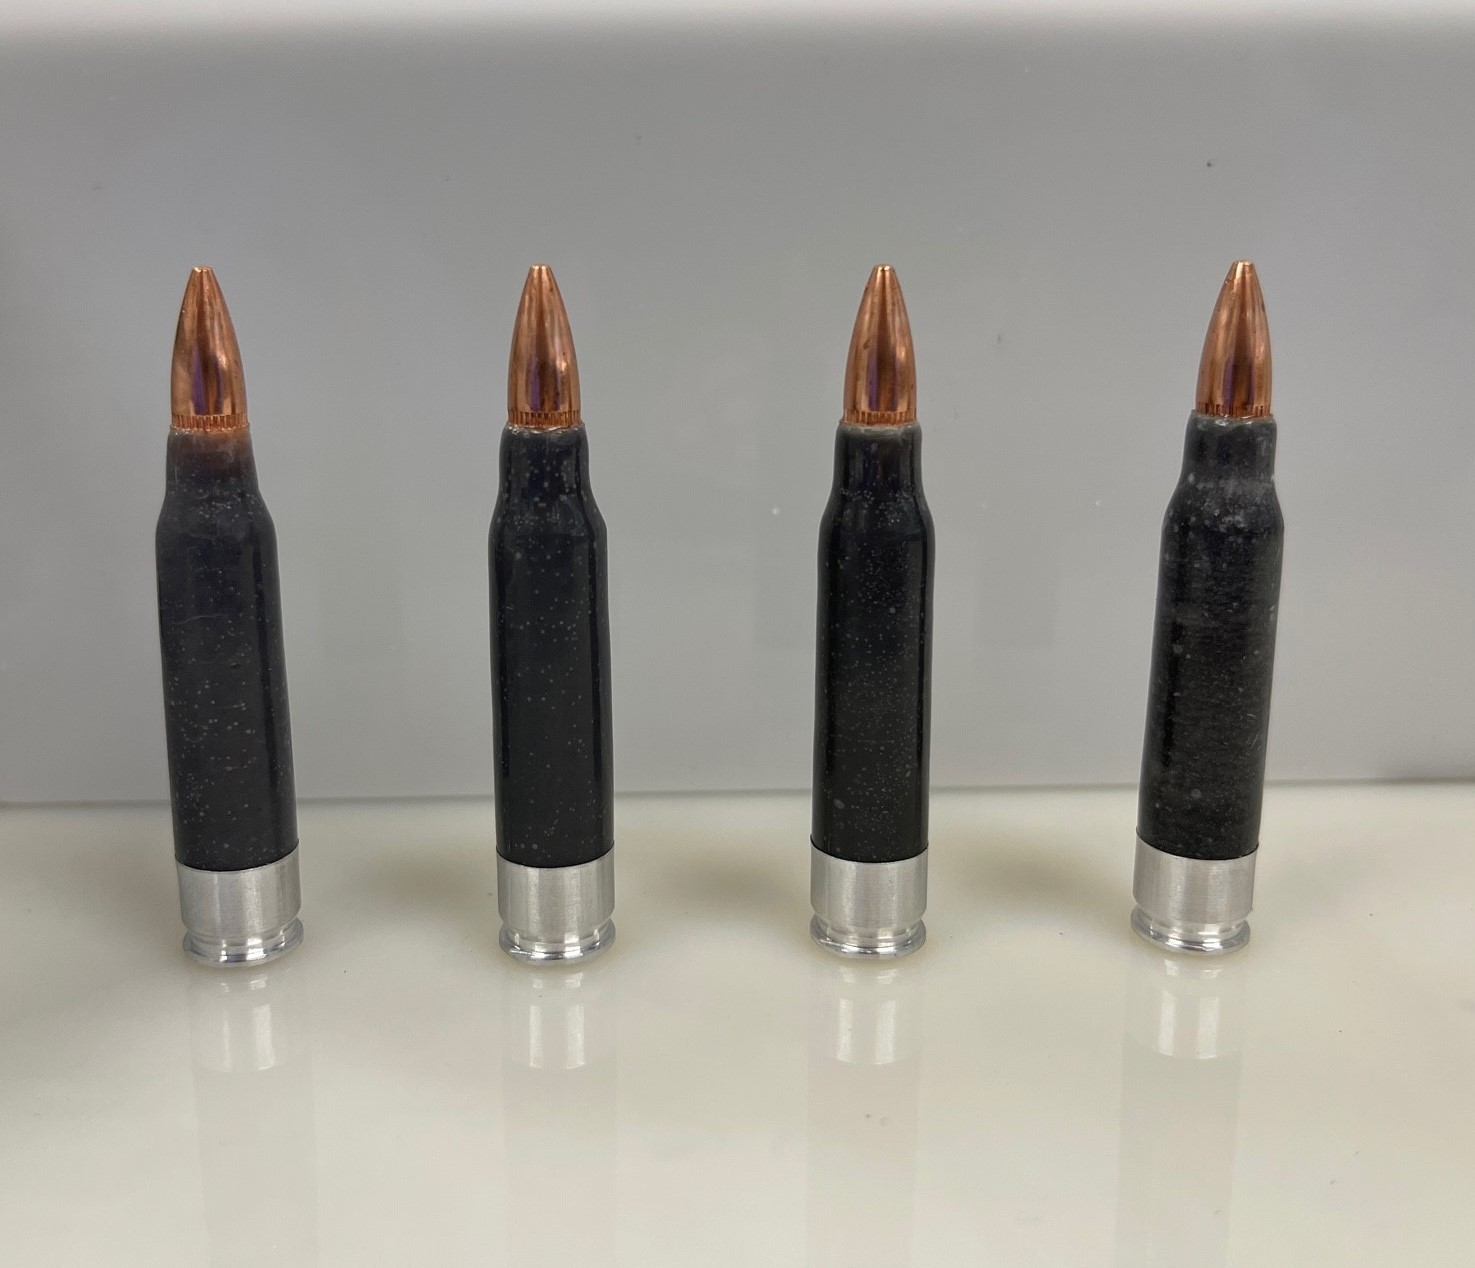 Combustible Cartridge Cases - Physical Sciences Inc.